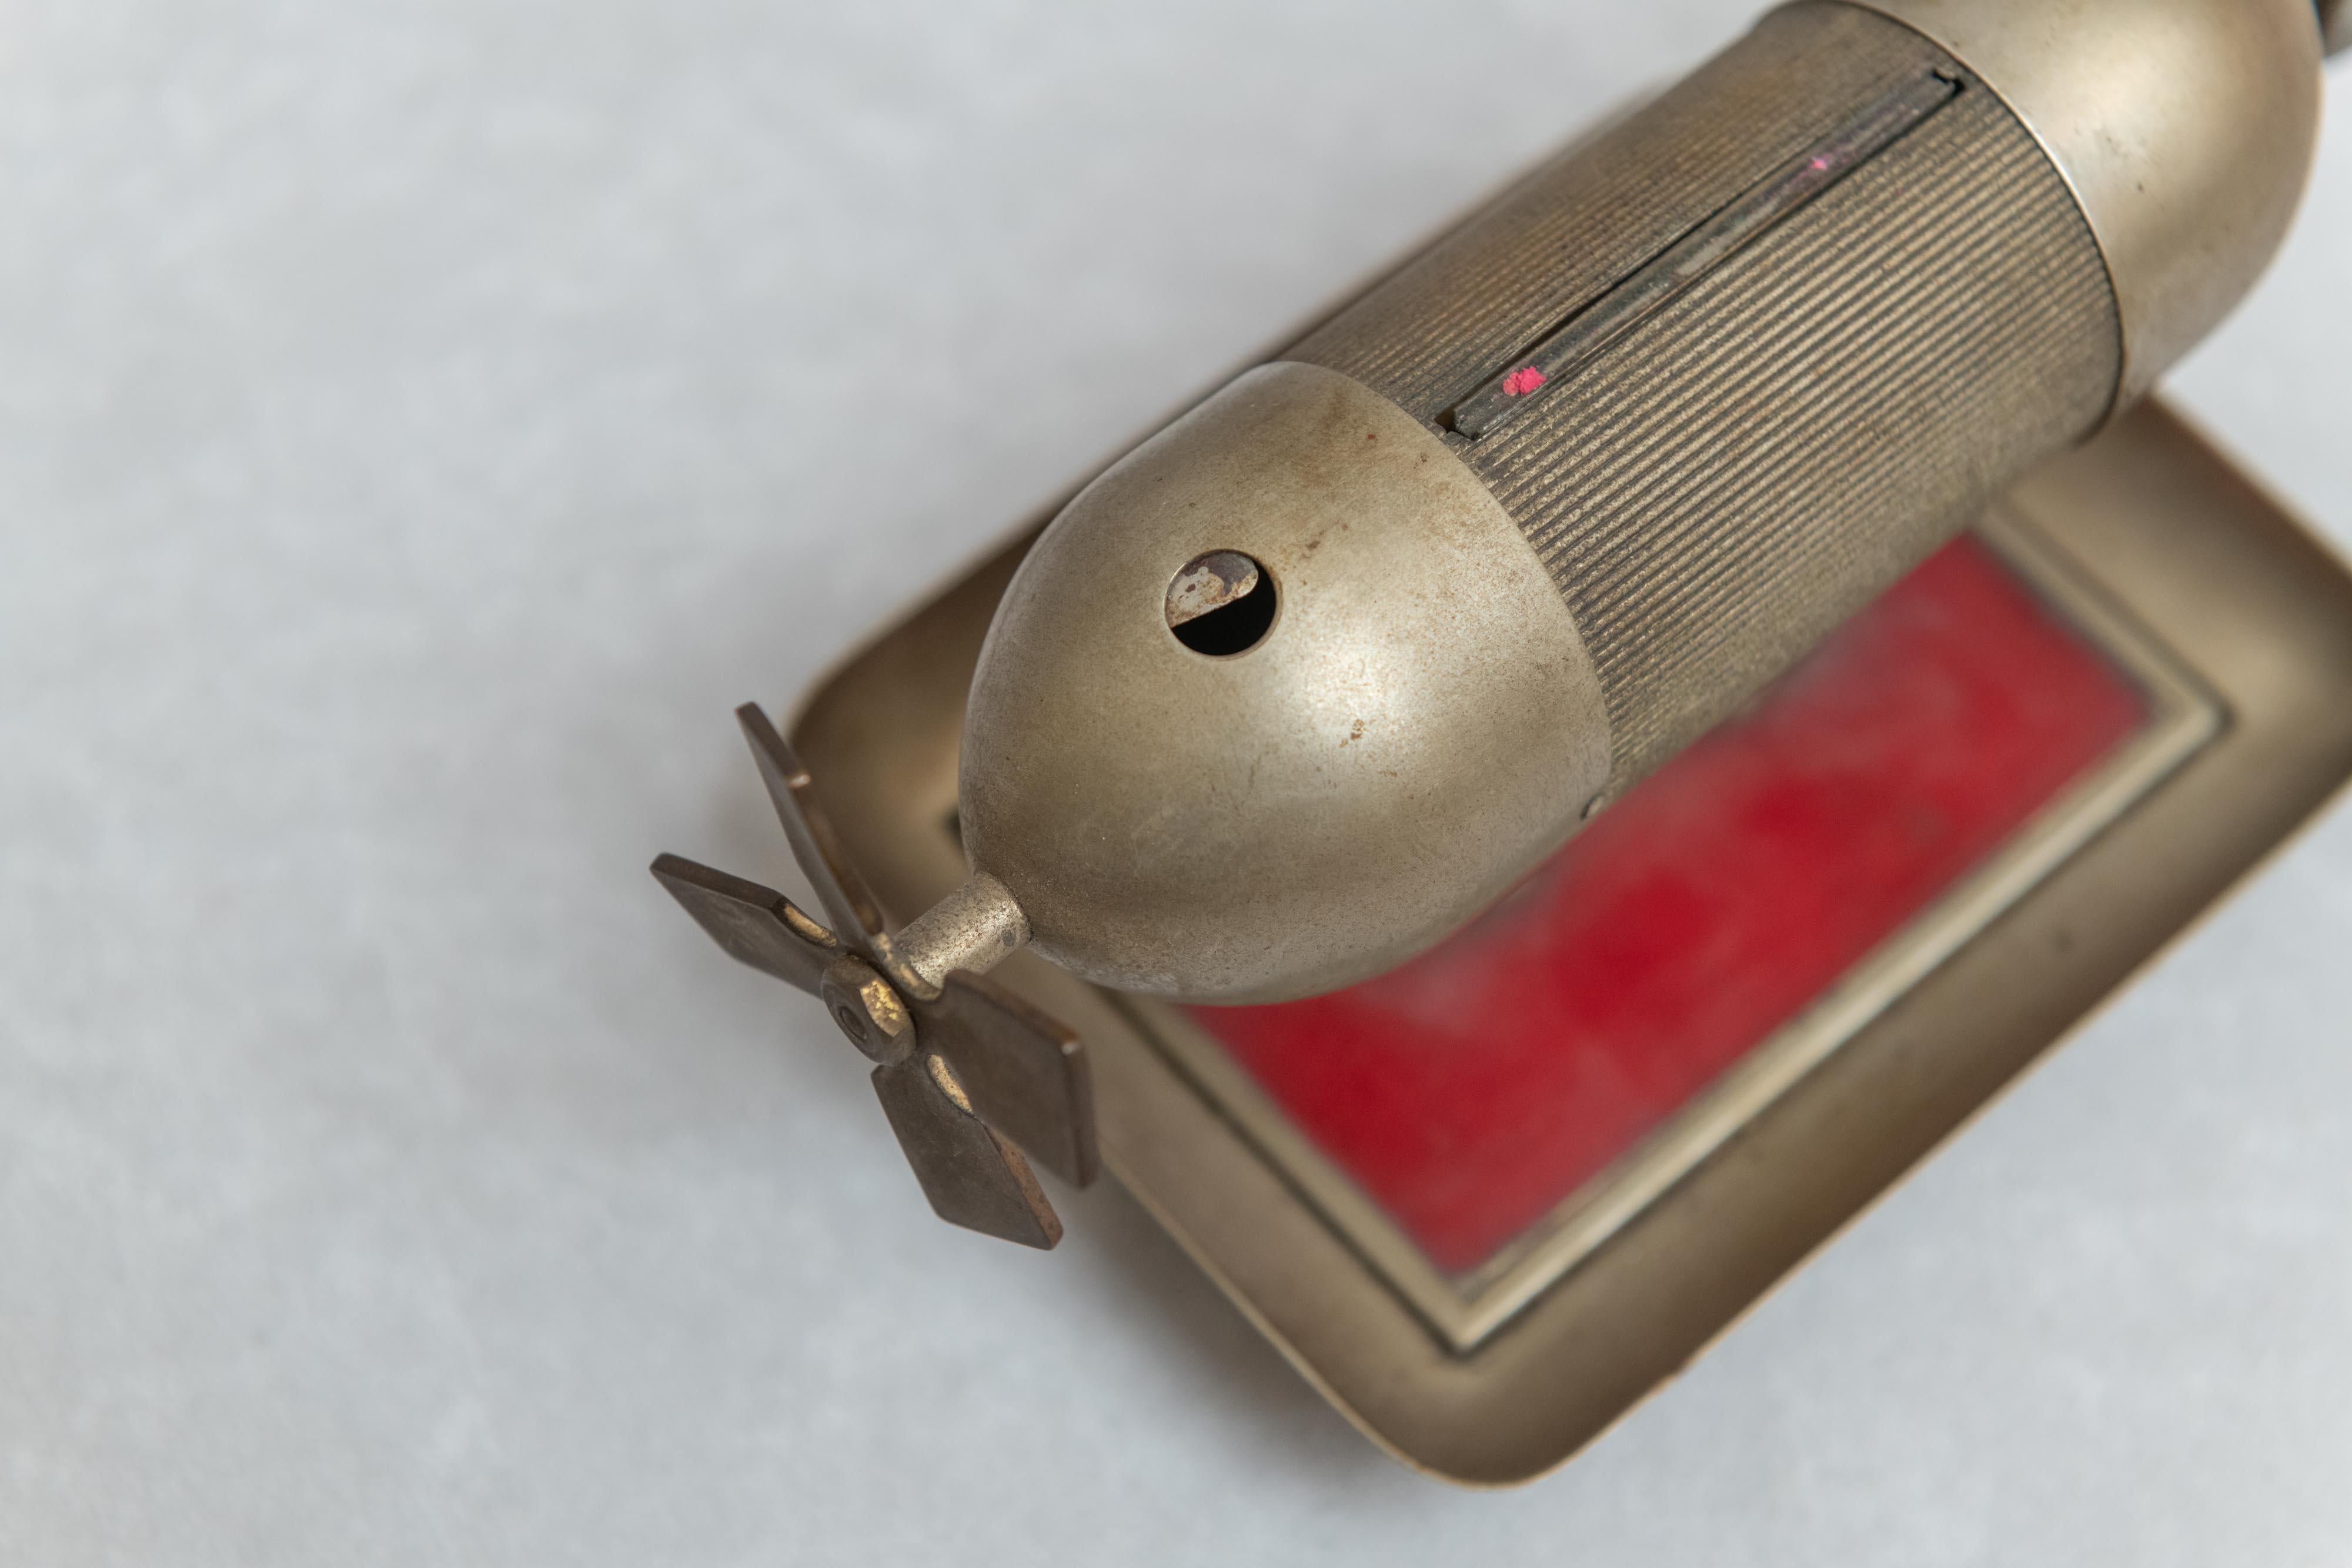 Silvered Torpedo Shaped Cigar Cutter & Match Holder, German, Early 20th Century